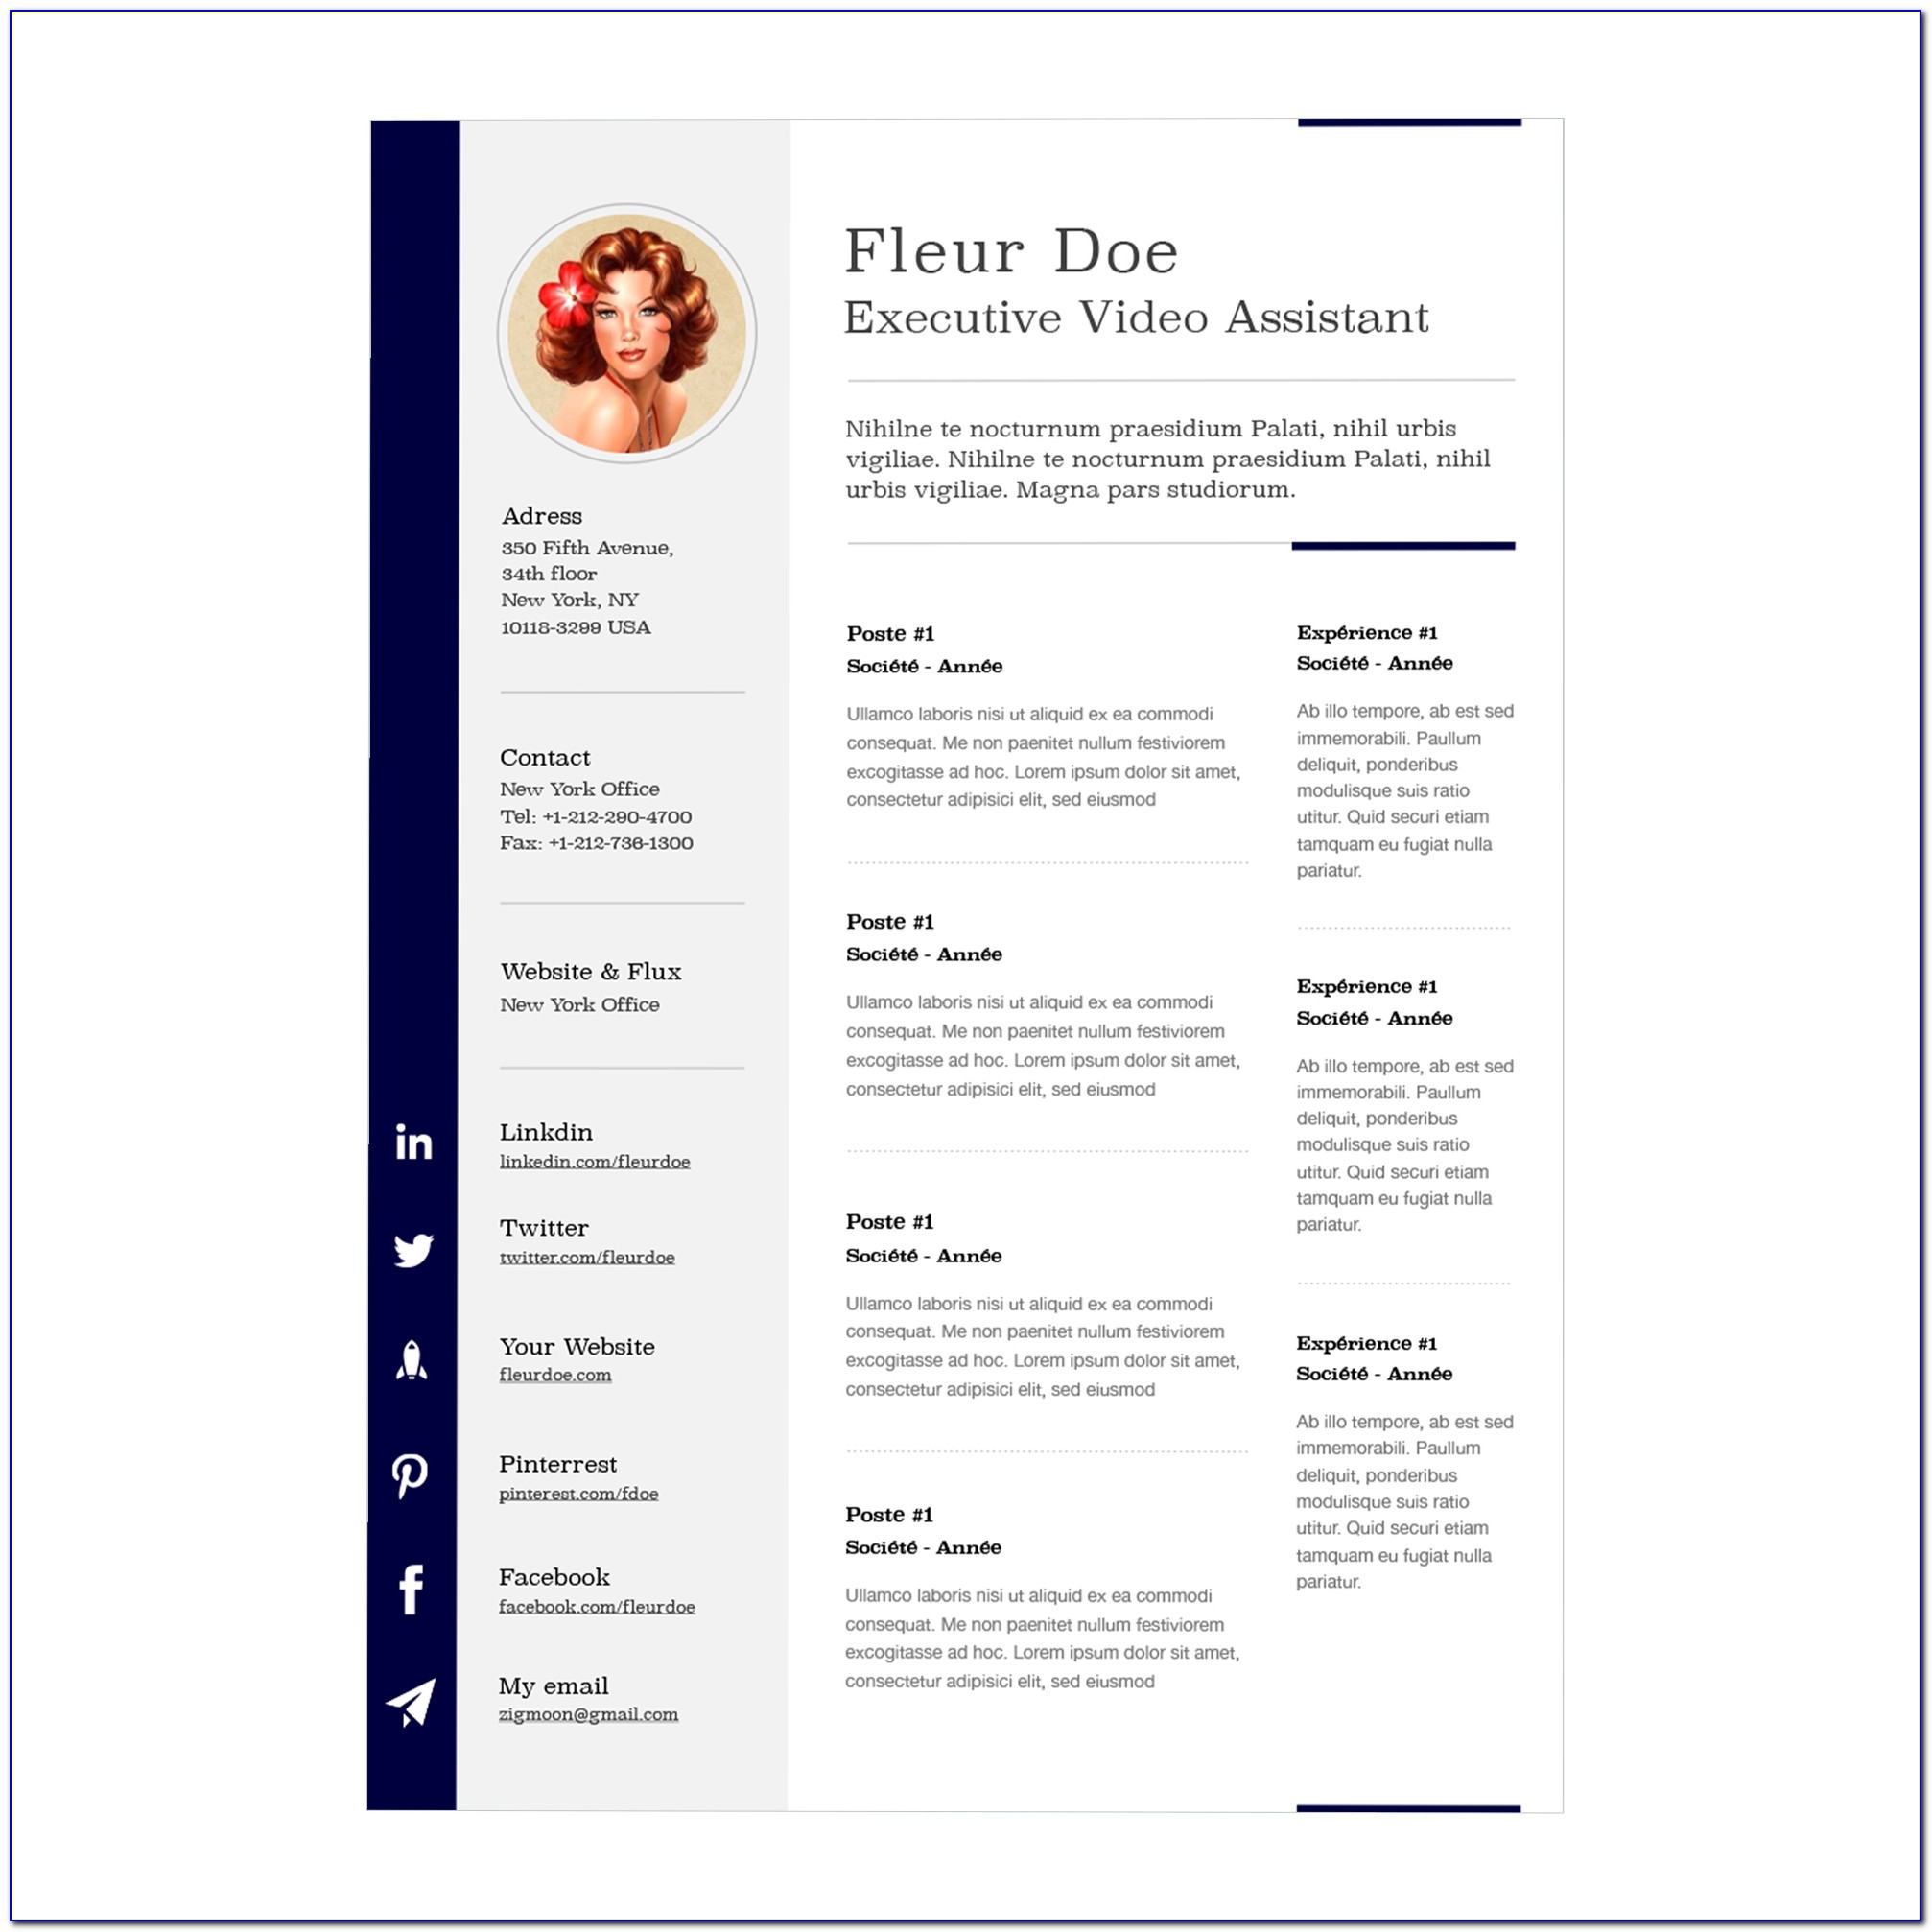 Free Resume Templates For Creative Professionals